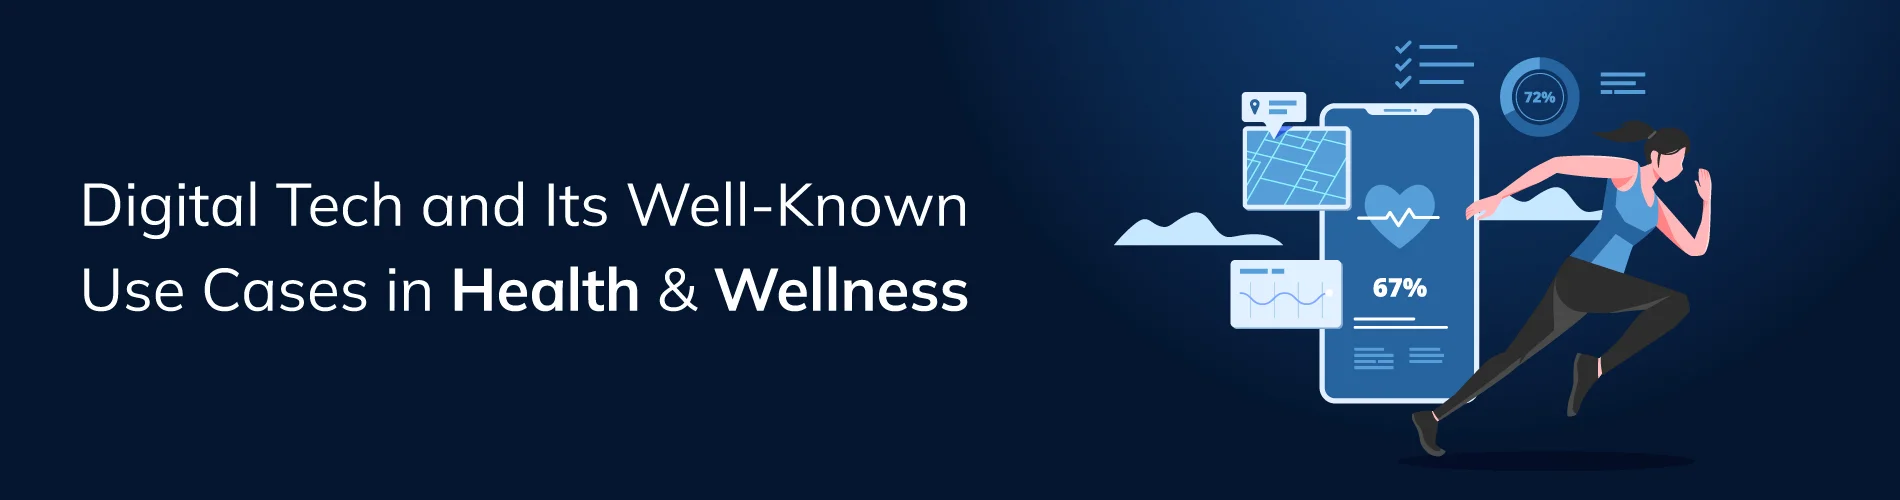 Use Cases of Digital Technologies in Health and Wellness​